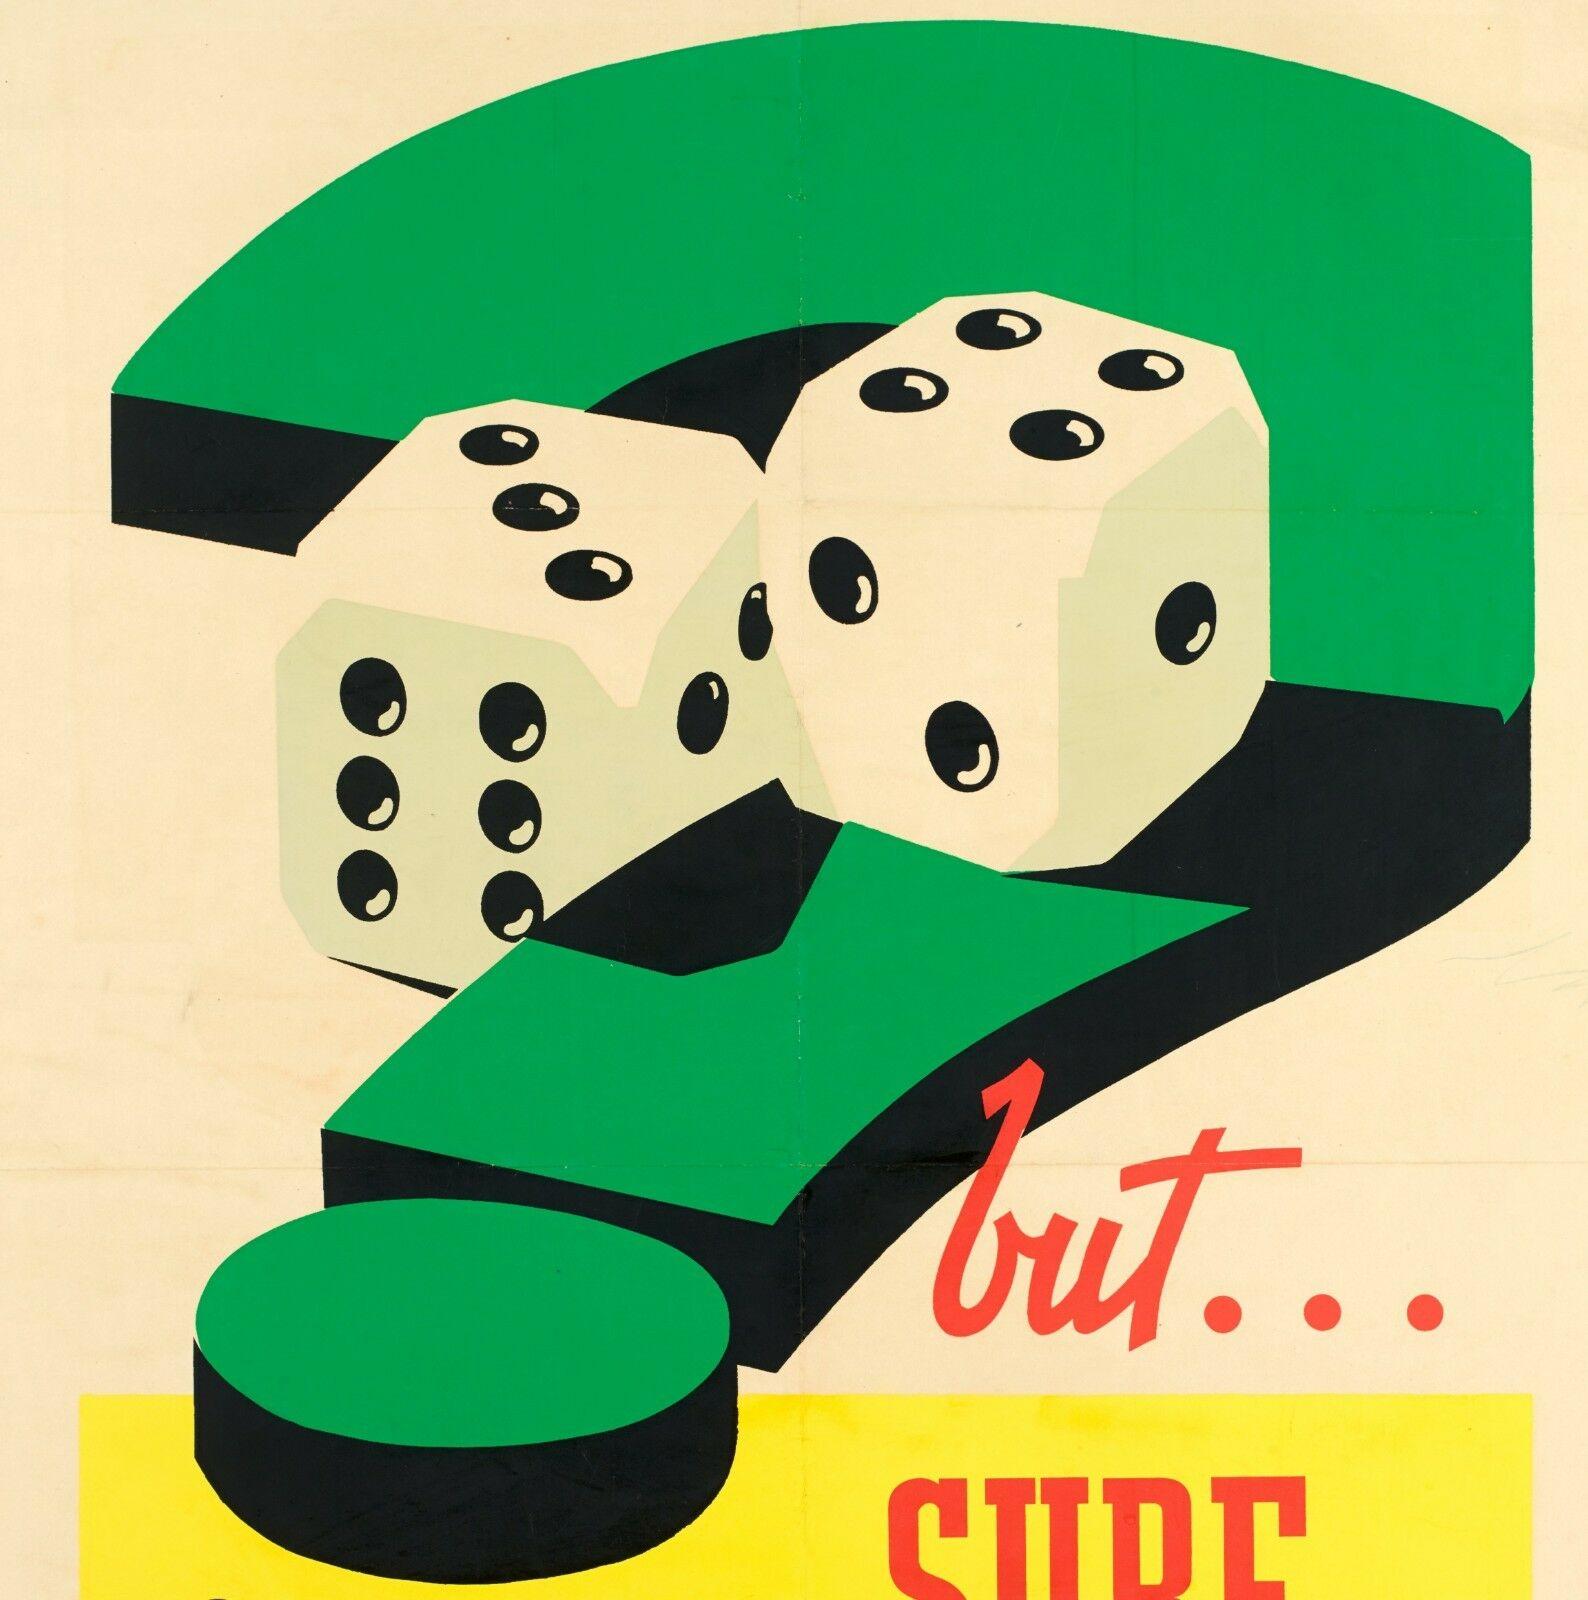 Art Deco Original You Can Be Sure of Shell Vintage Poster, Oil Gas Petrol, Dice,  1925